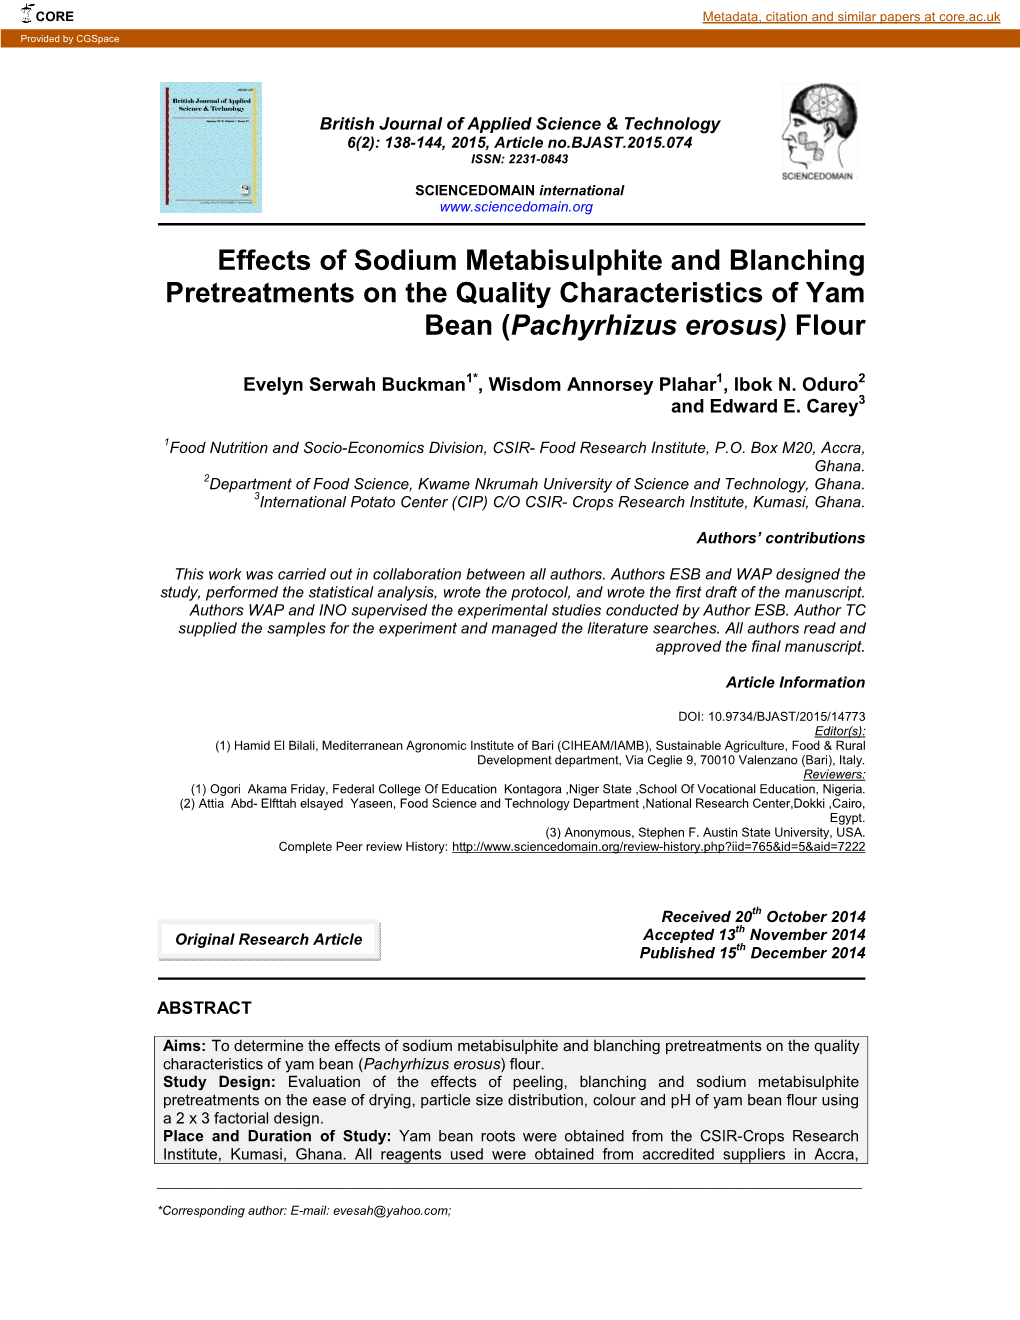 Effects of Sodium Metabisulphite and Blanching Pretreatments on the Quality Characteristics of Yam Bean (Pachyrhizus Erosus) Flour